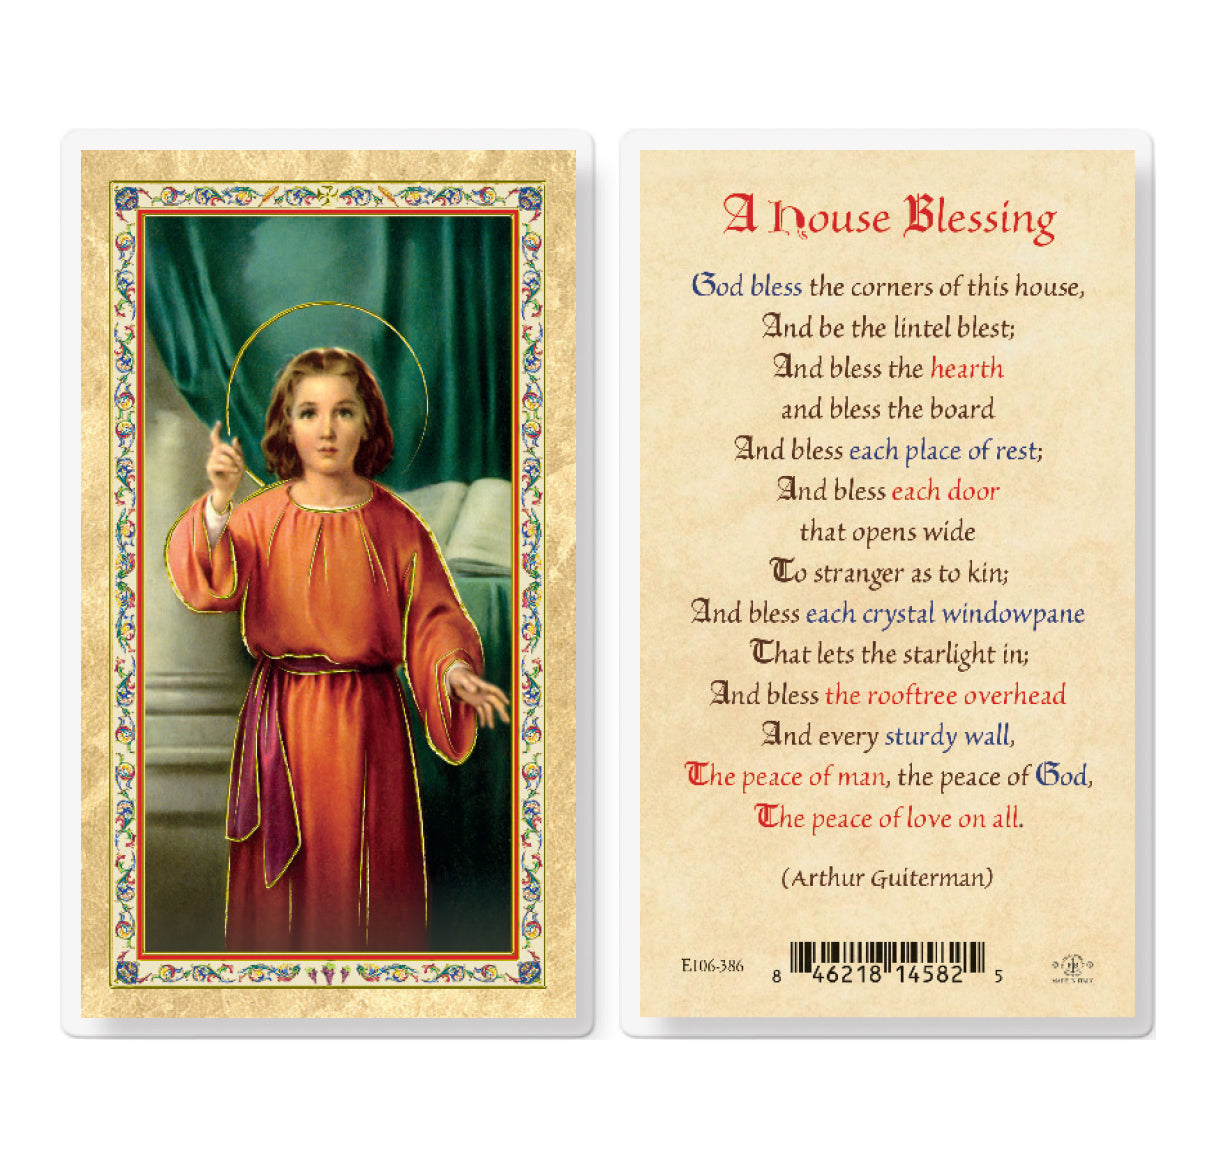 A House Blessing - Christ Knock Gold-Stamped Laminated Catholic Prayer Holy Card with Prayer on Back, Pack of 25